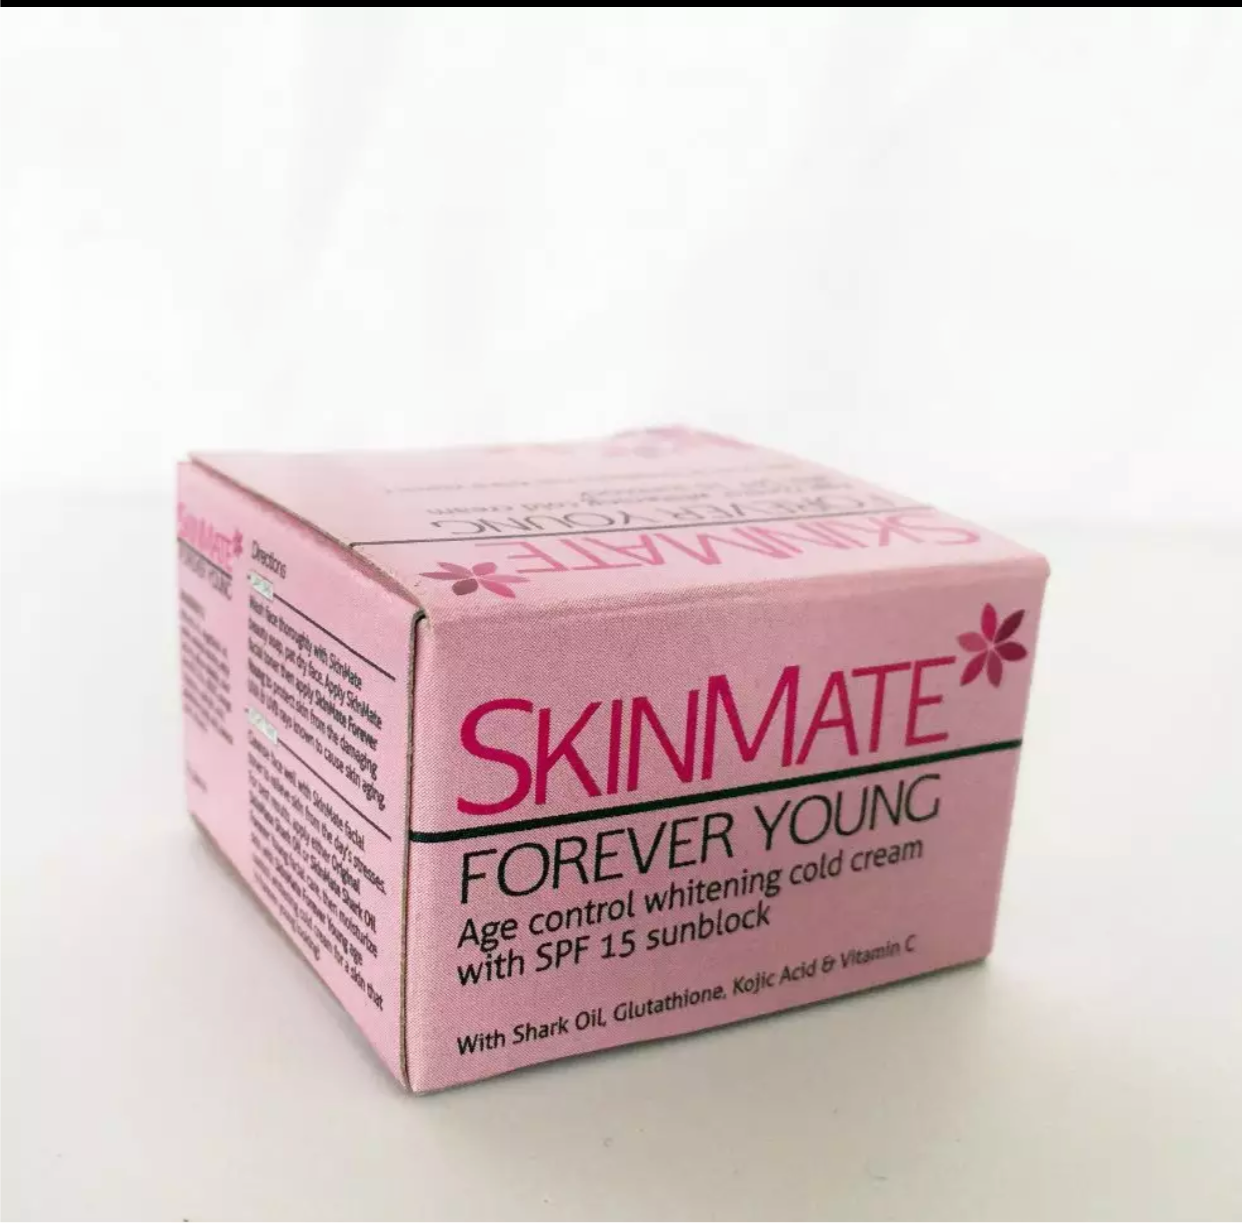 SkinMate Forever Young Age Control Whitening Cold Cream 8g